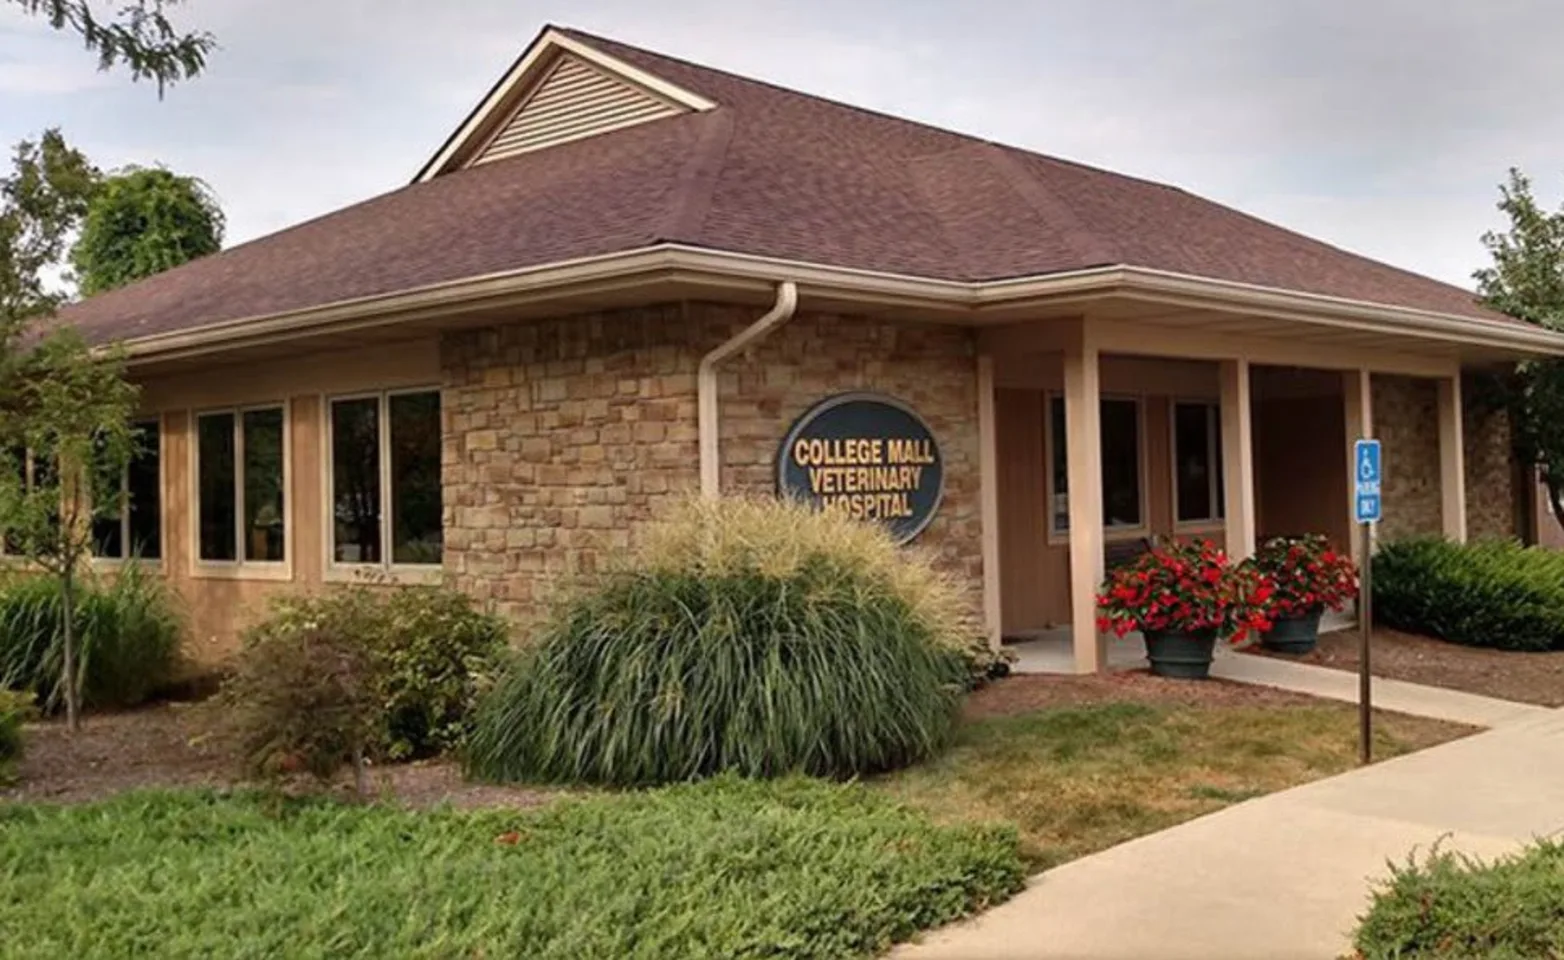 Exterior of College Mall Veterinary Hospital